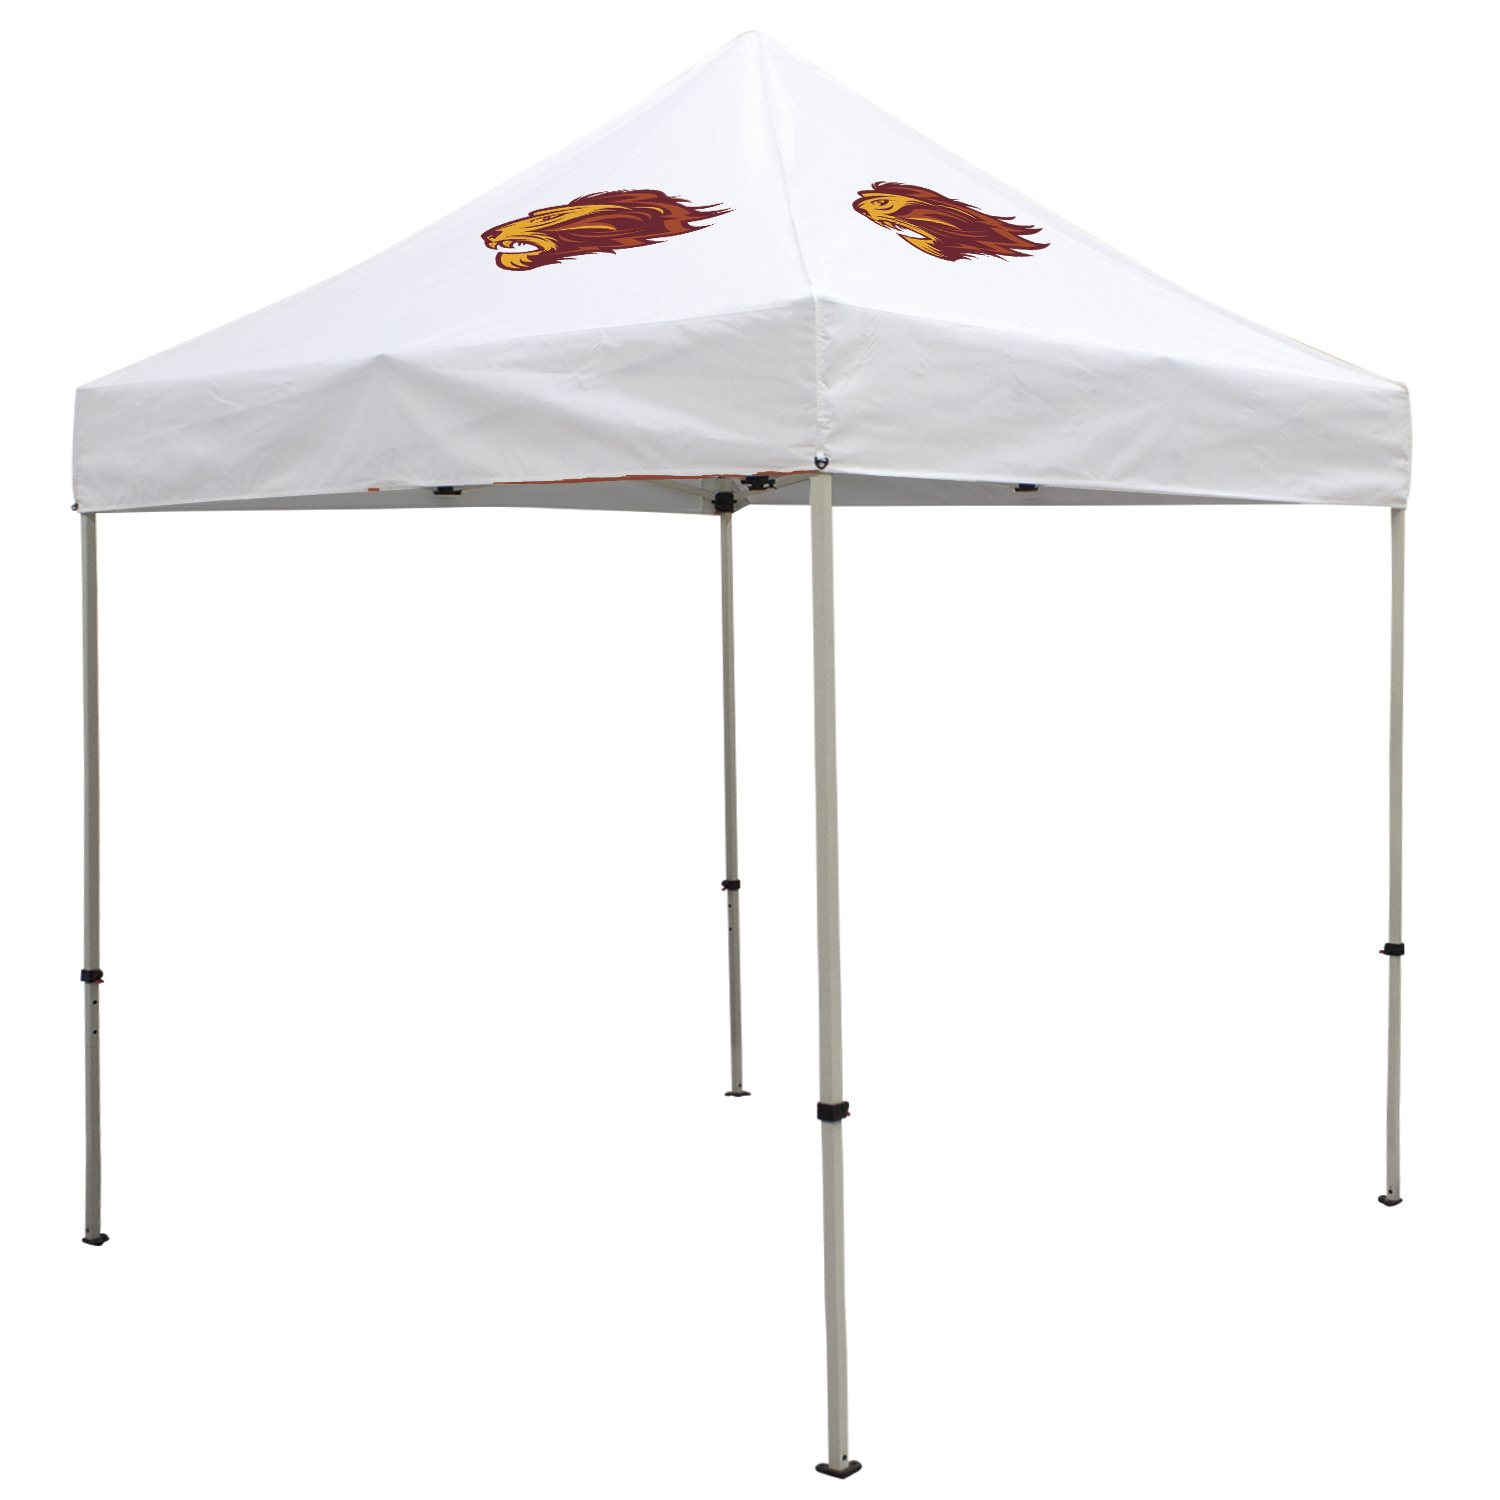 Deluxe 8 x 8 Event Tent Kit (2 Locations)